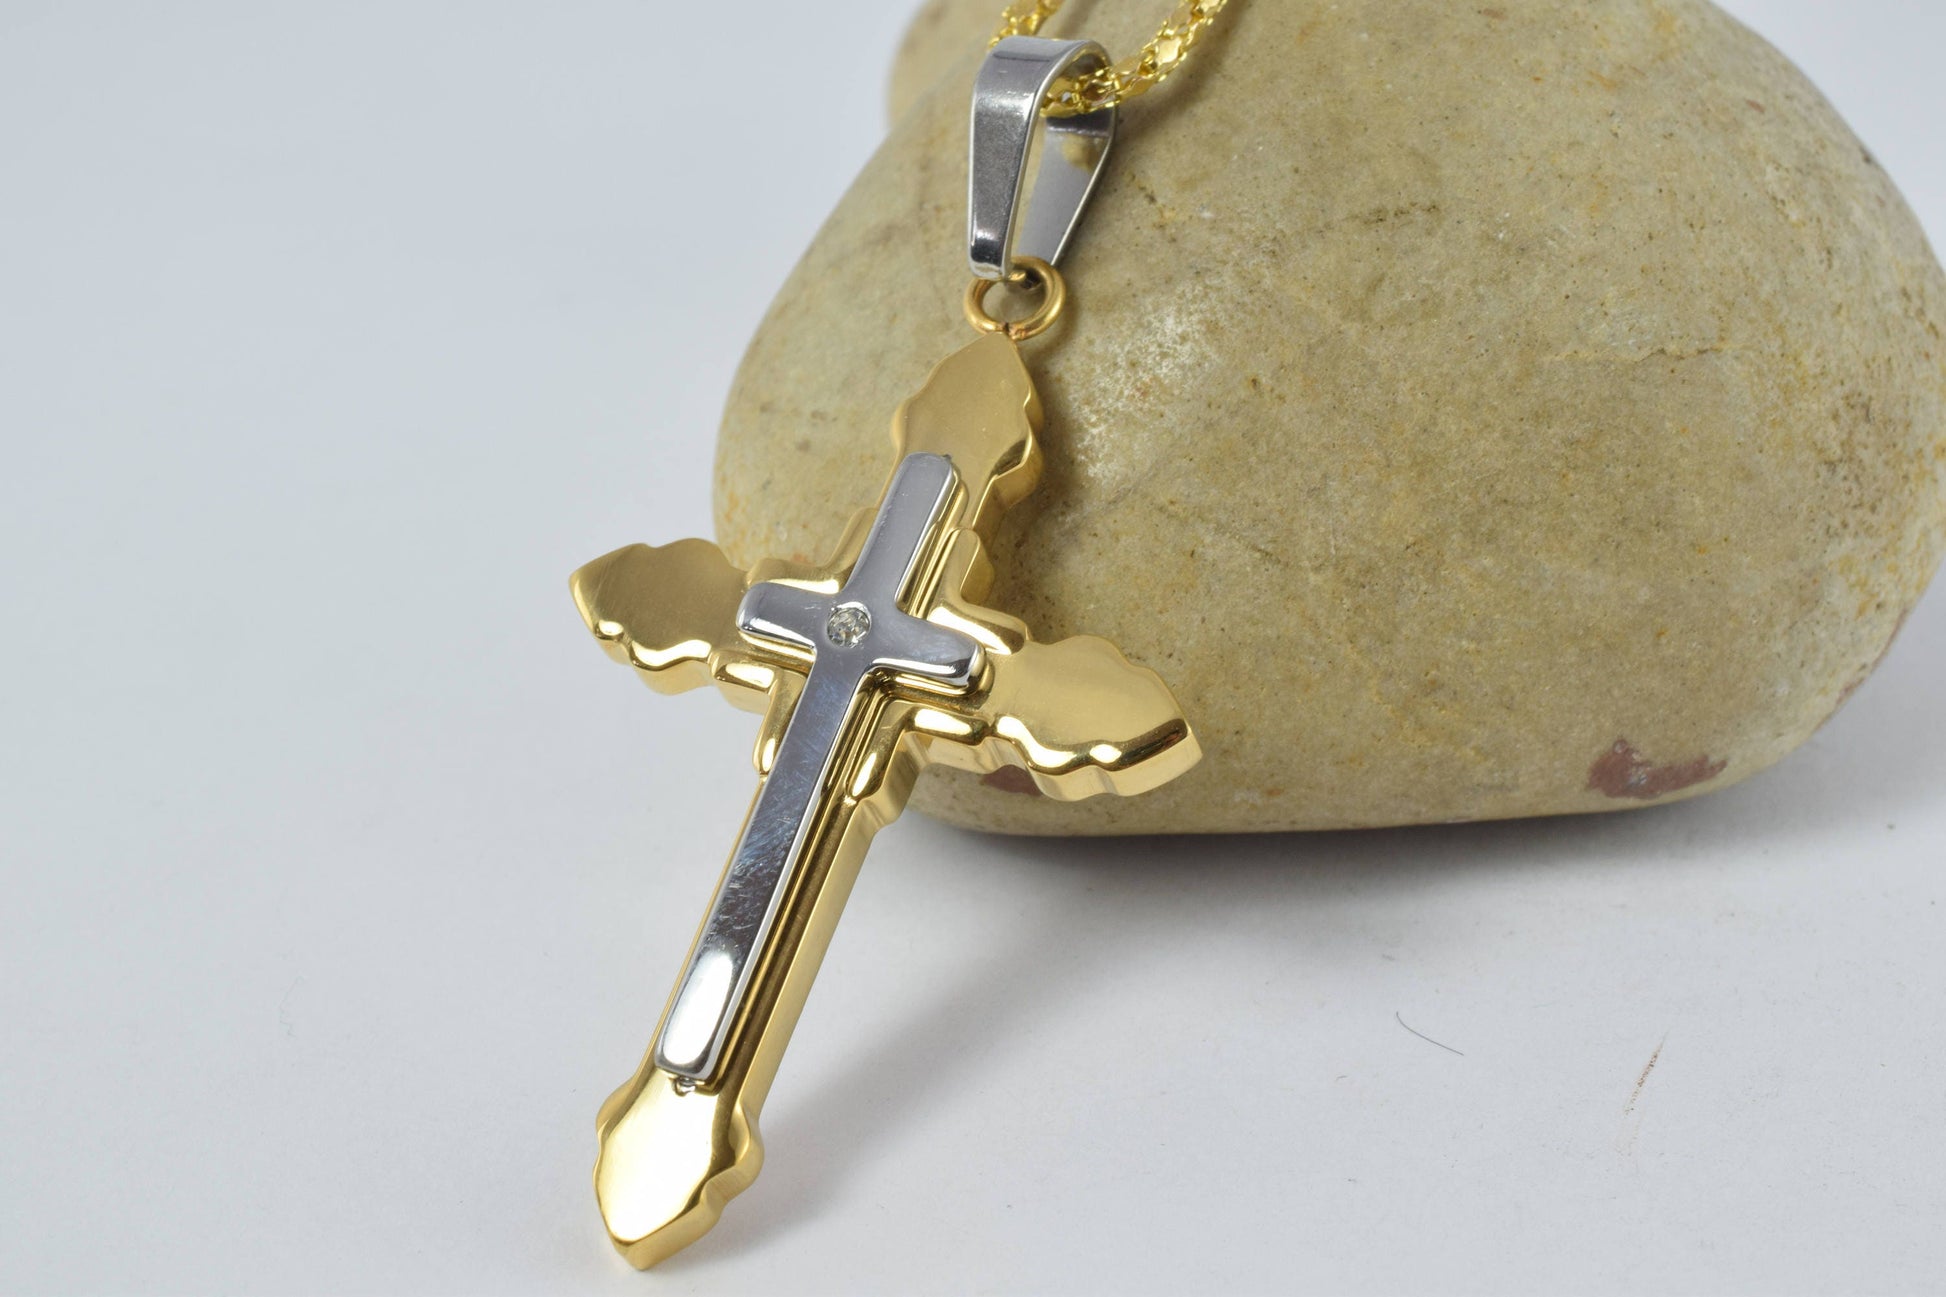 18K Gold Filled Cross Religious Pendants Stainless Steel Size 52x32mm Christian Religious, First Communion Baby Baptism For Jewelry Making